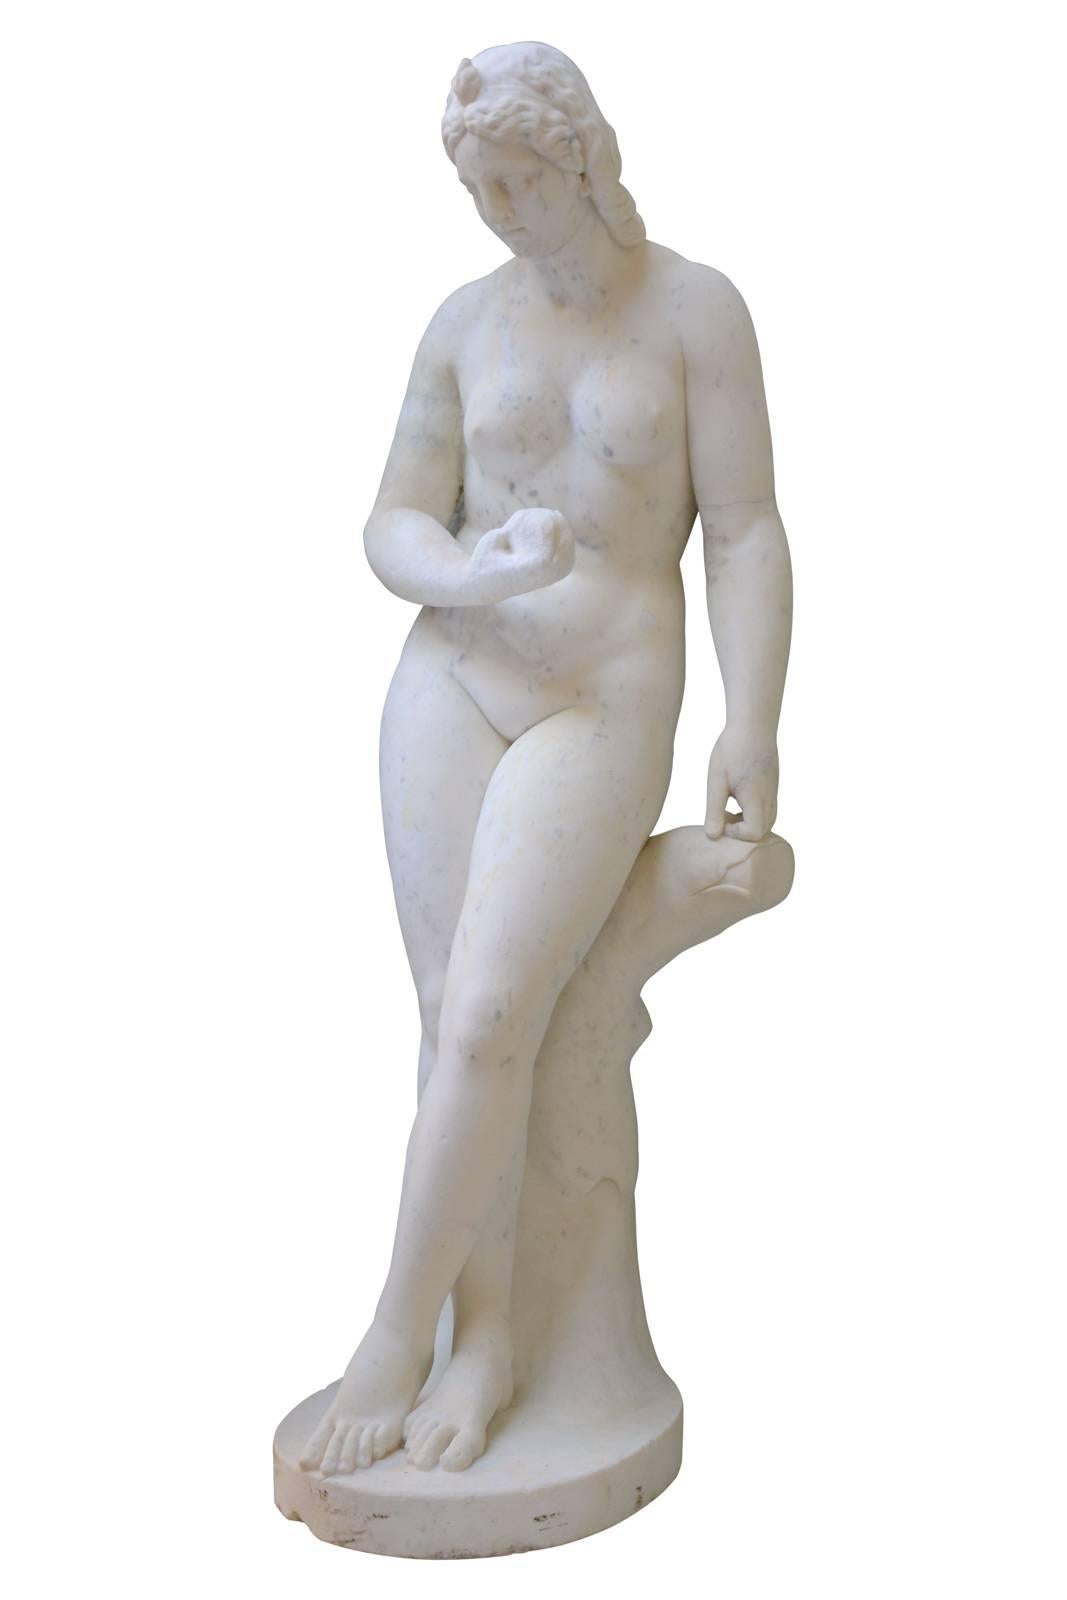 Dating from the 18th century, important Carrara marble statue of Venus with apple. She is lasciviously sitting on a tree trunk, cross left leg, gently tilted look, she has the golden apple offered by Pâris. Venus triumph, here, in all its nakedness